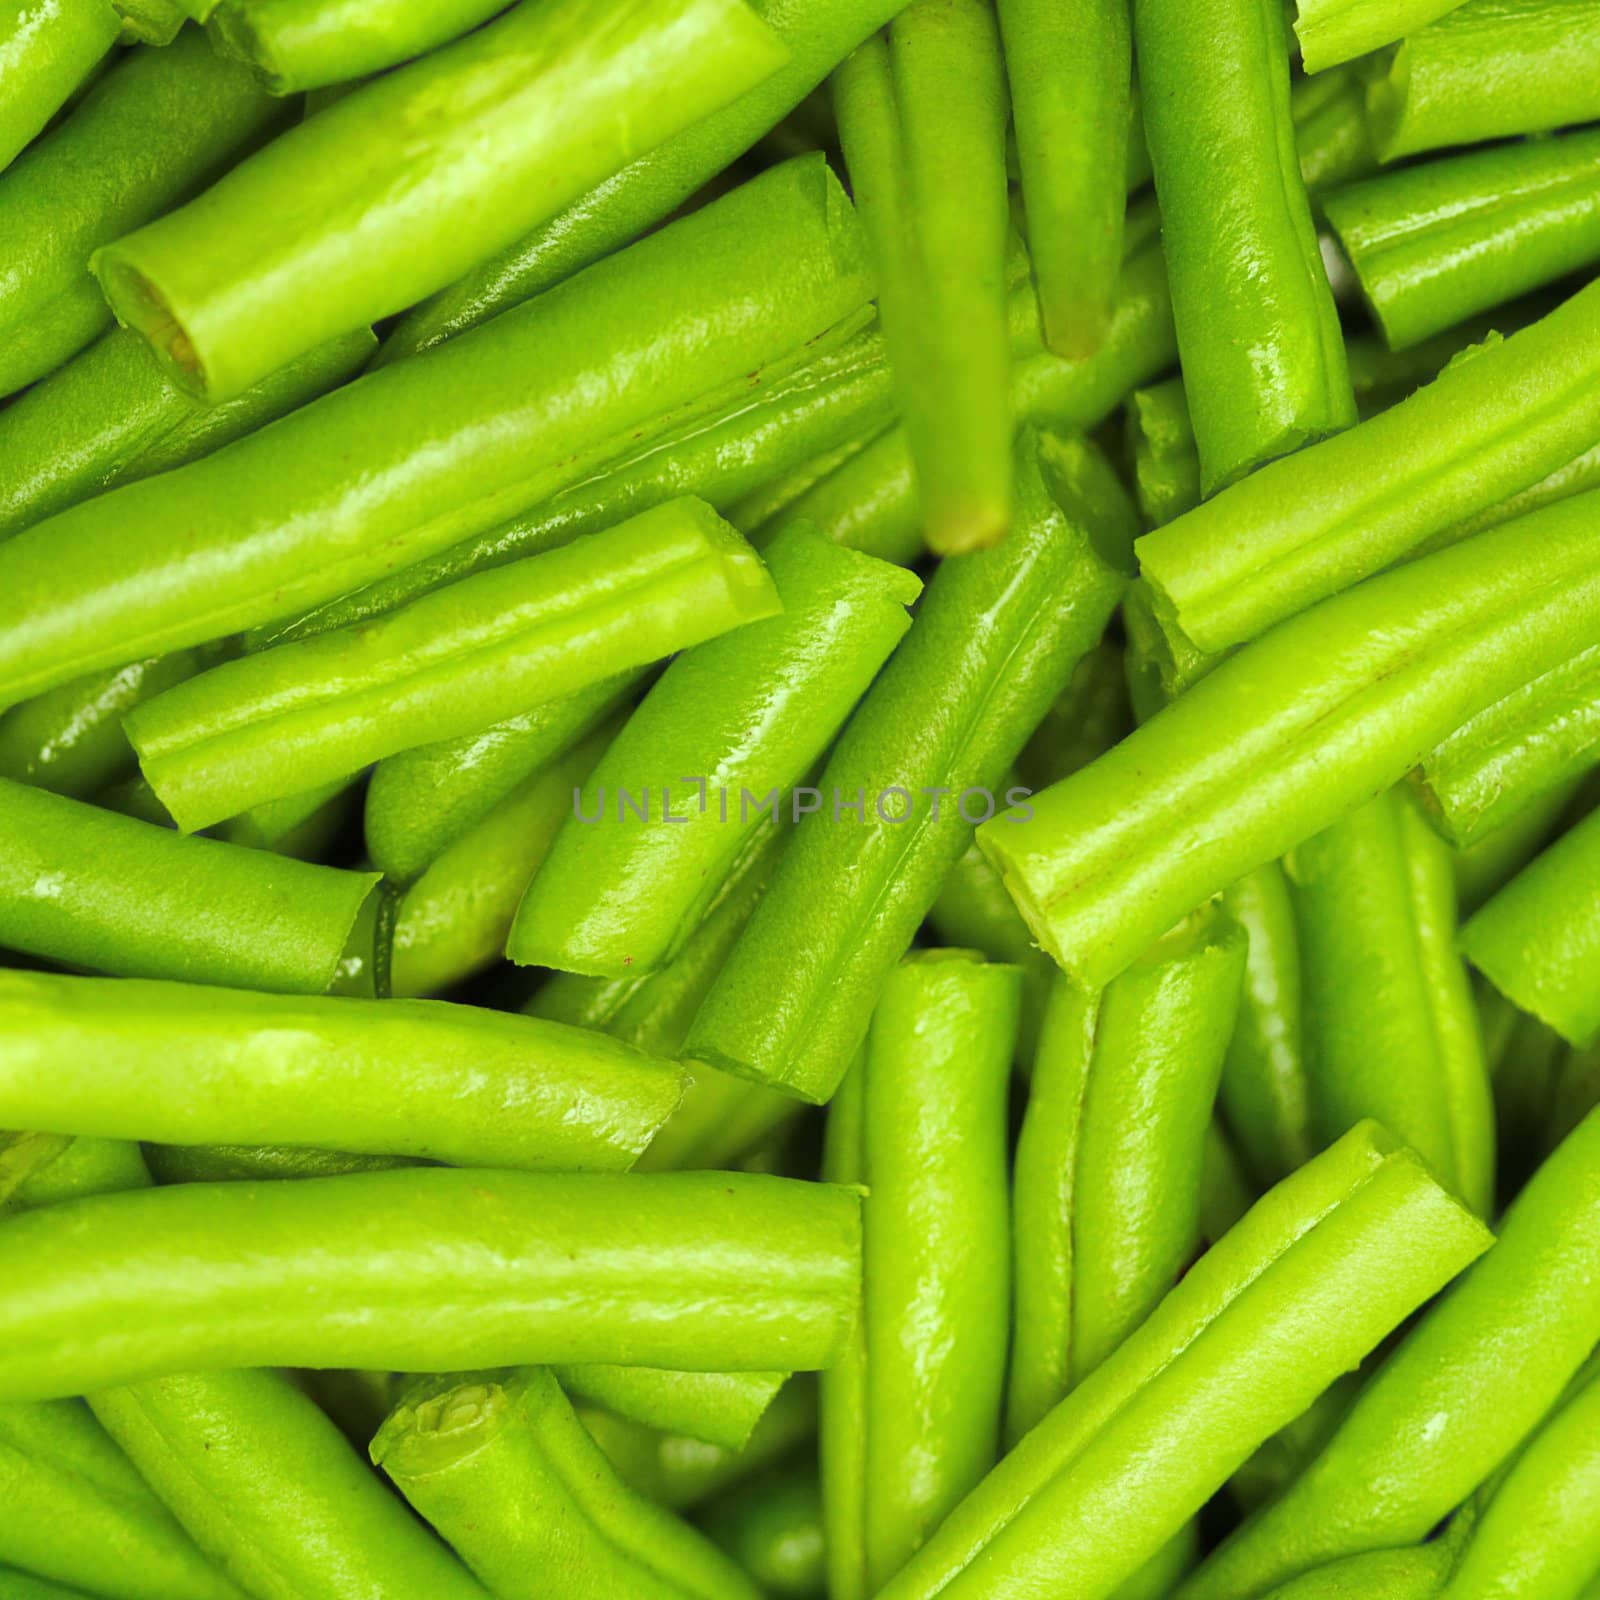 String beans as a background